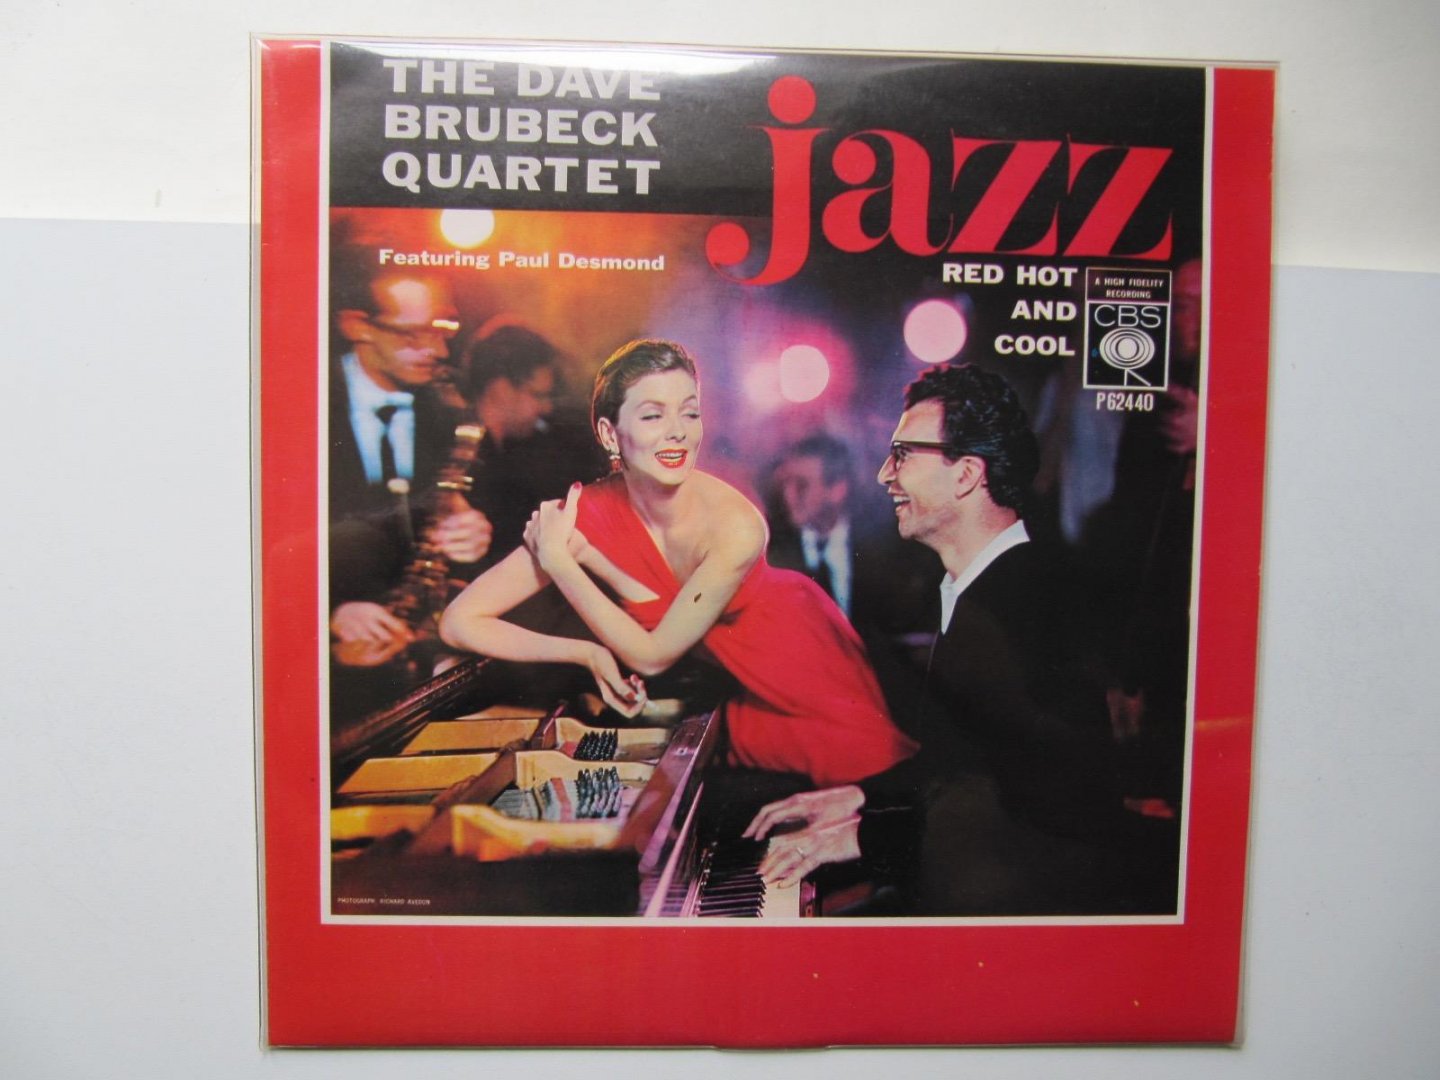 Dave Brubeck - Jazz - Time further out enz.